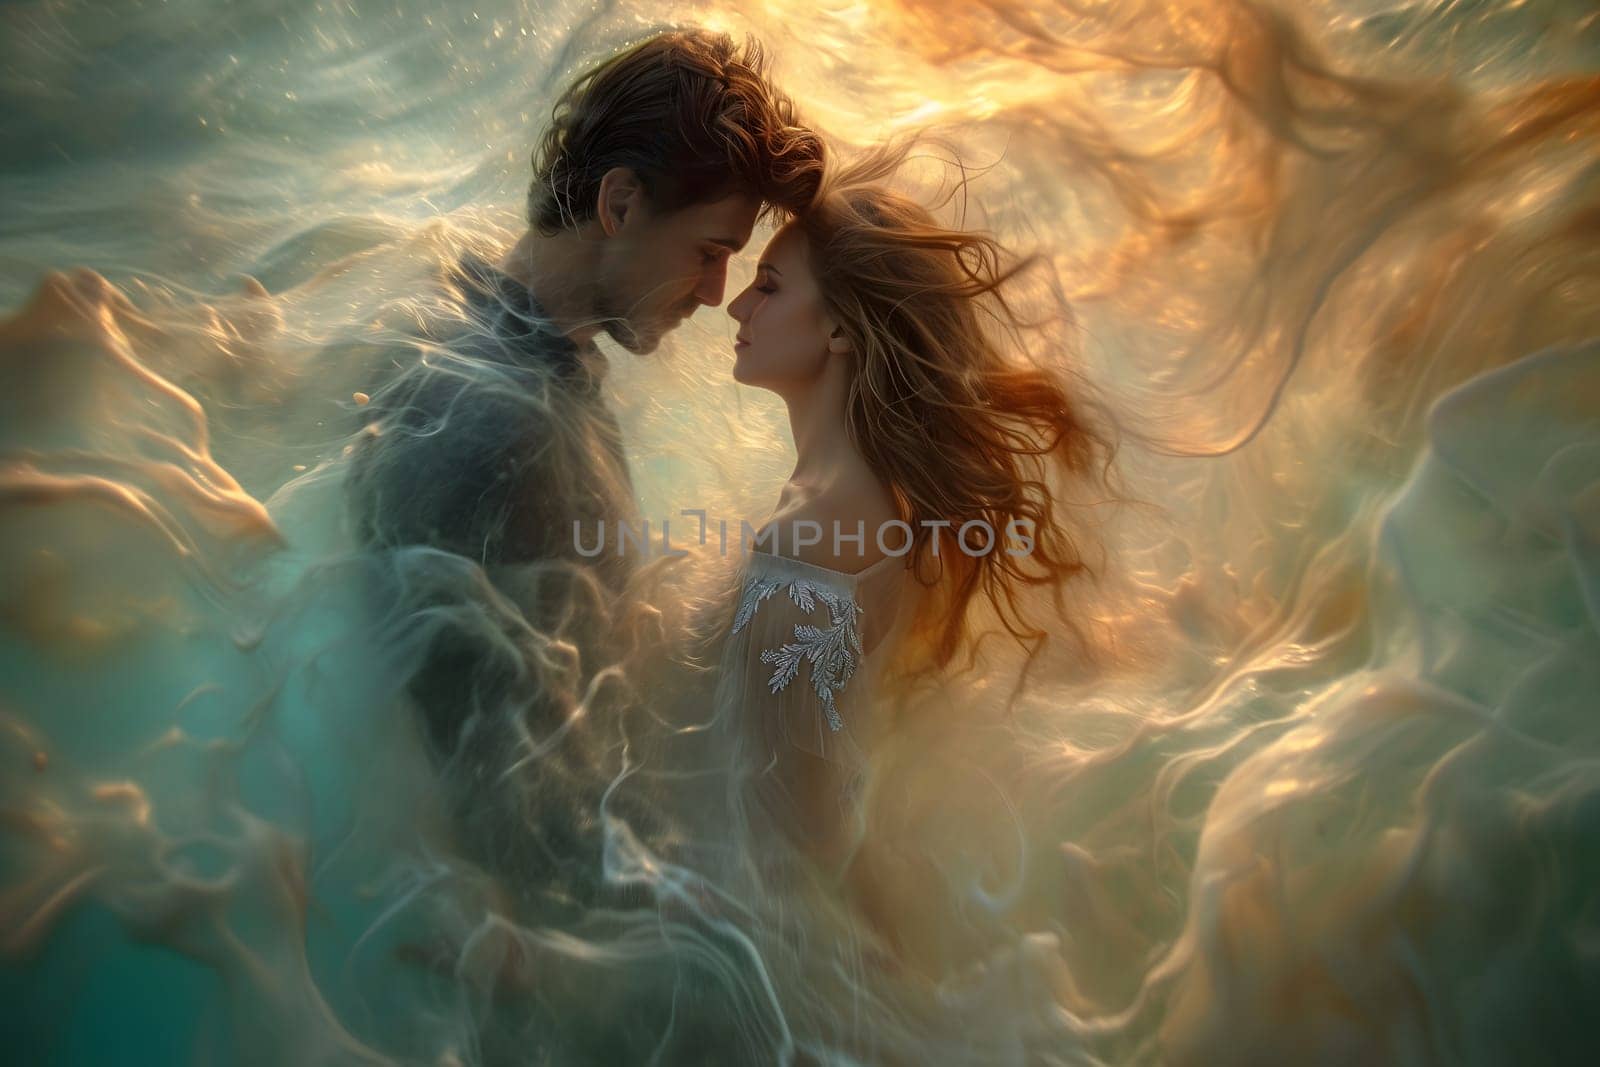 Man and woman embracing in surreal, colorful liquid fantasy dreamscape by z1b